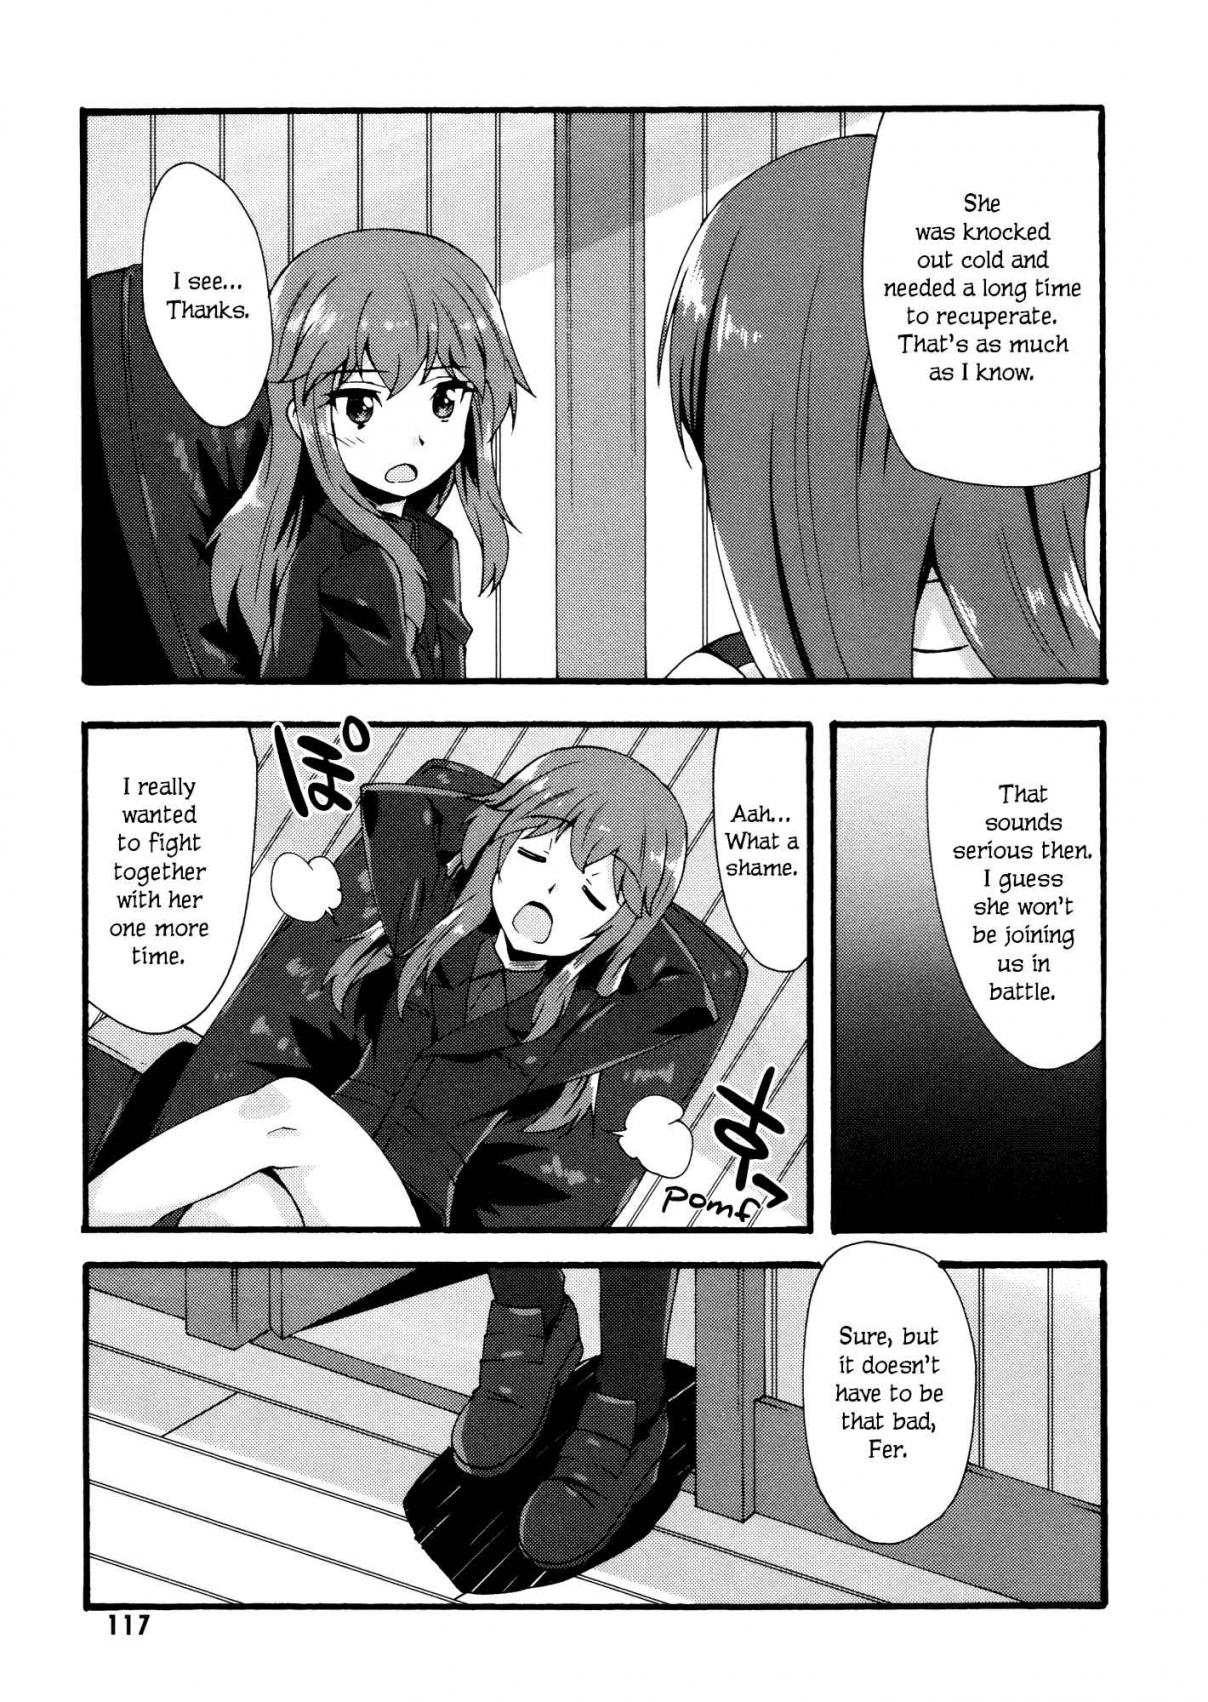 Strike Witches Red Witches Ch. 5 Two More Posts Filled (First Part)